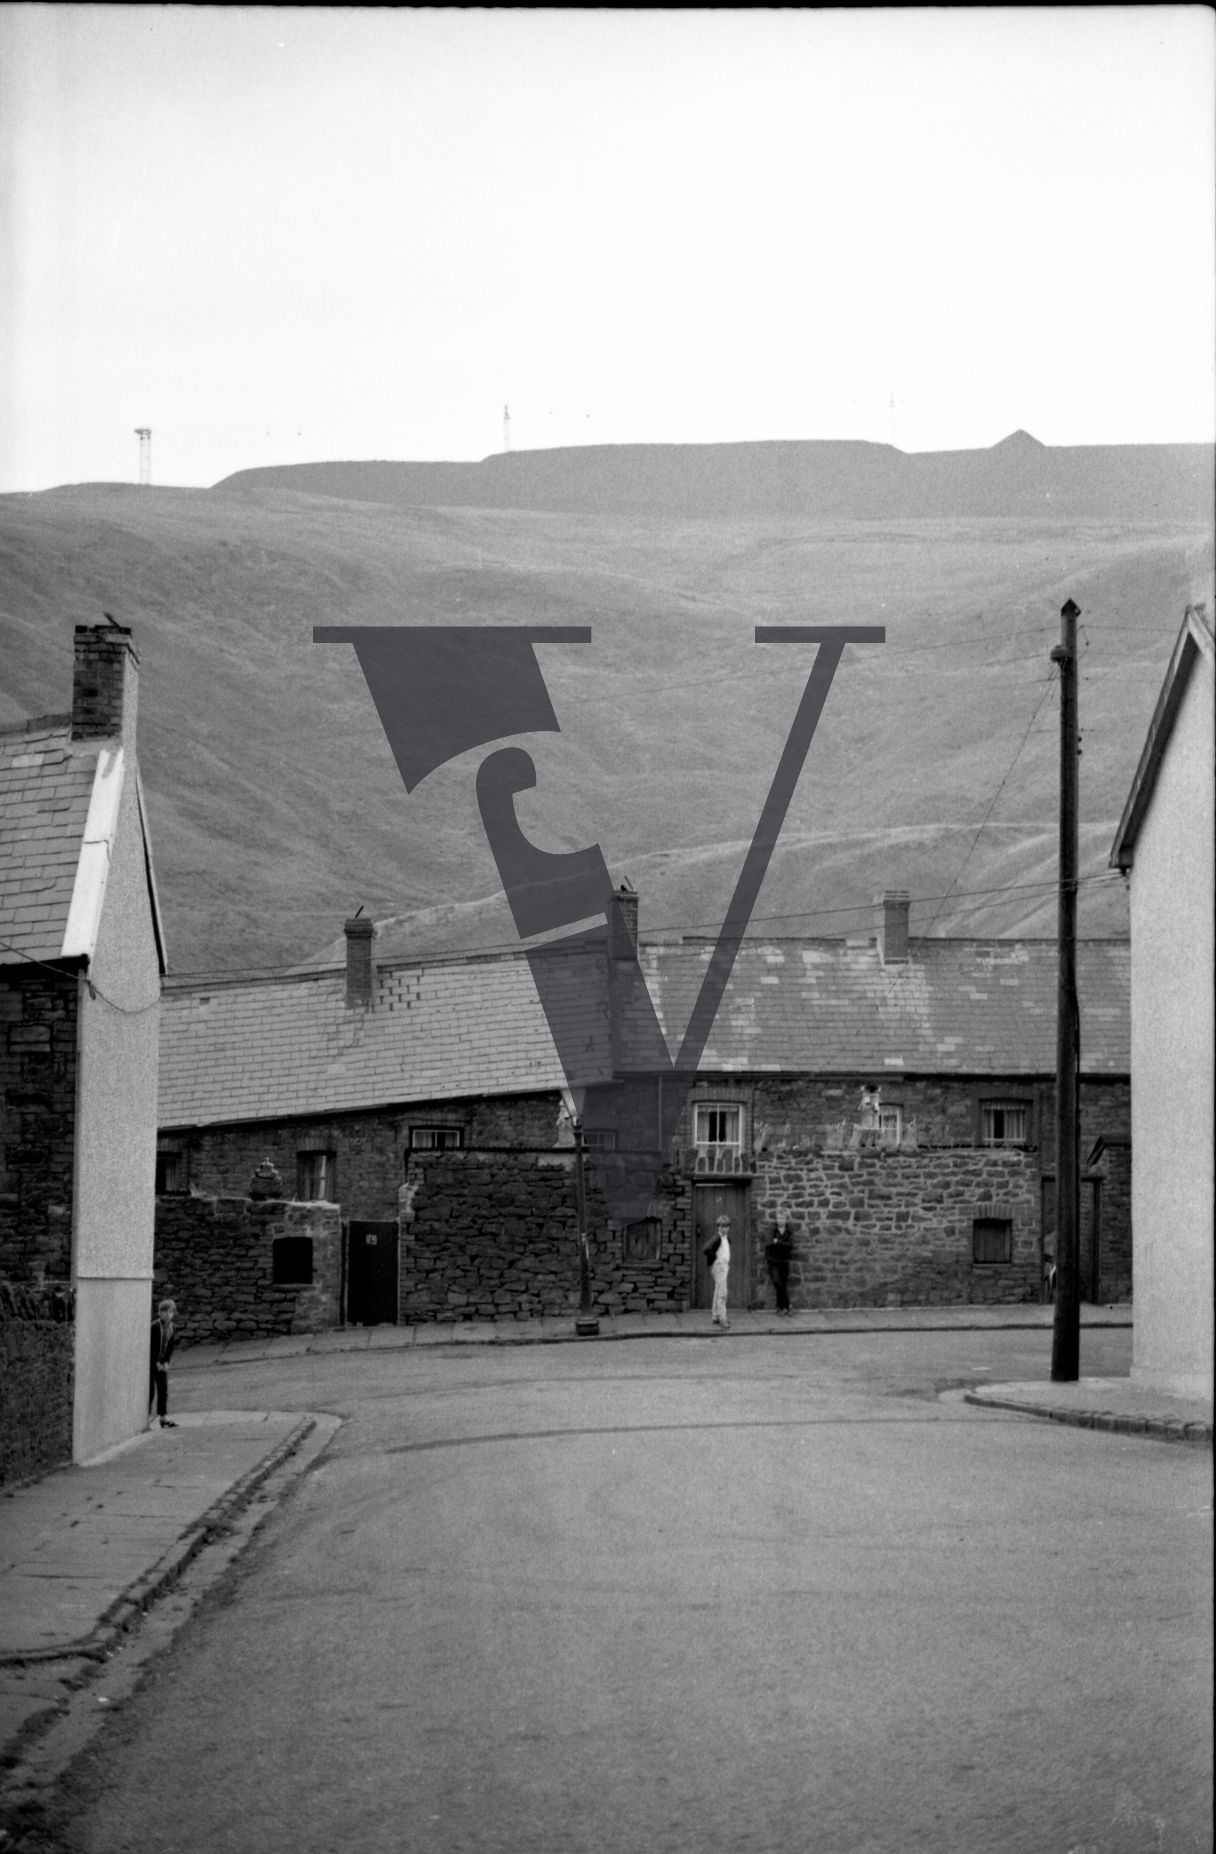 Tonypandy, Wales, Mining Community, street view, hills in background.